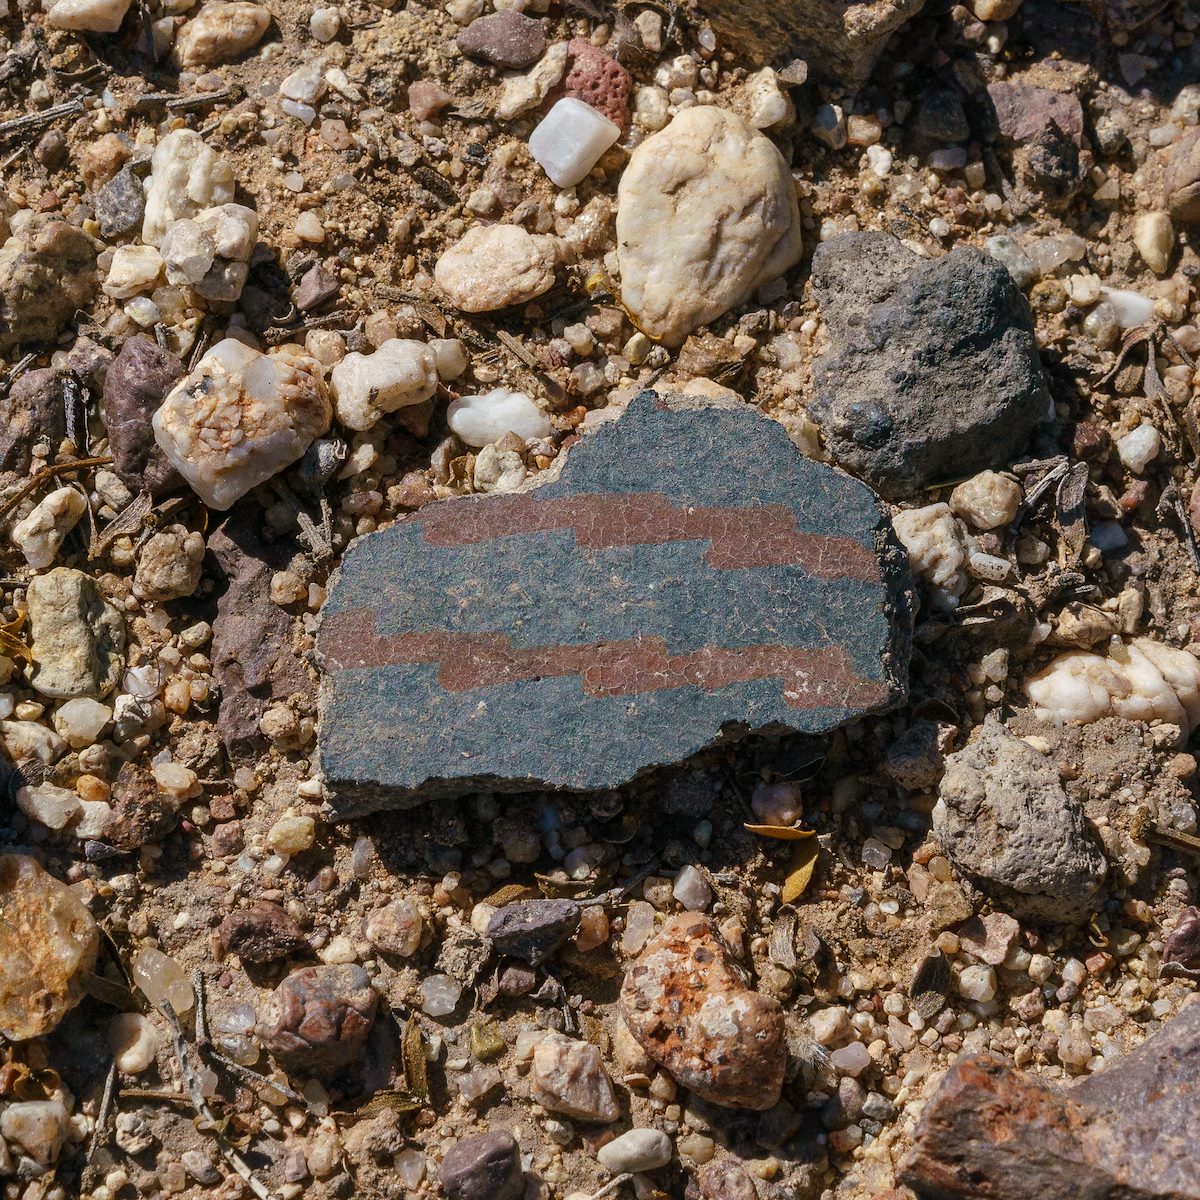 2018 March Pottery Sherd at Los Morteros 01